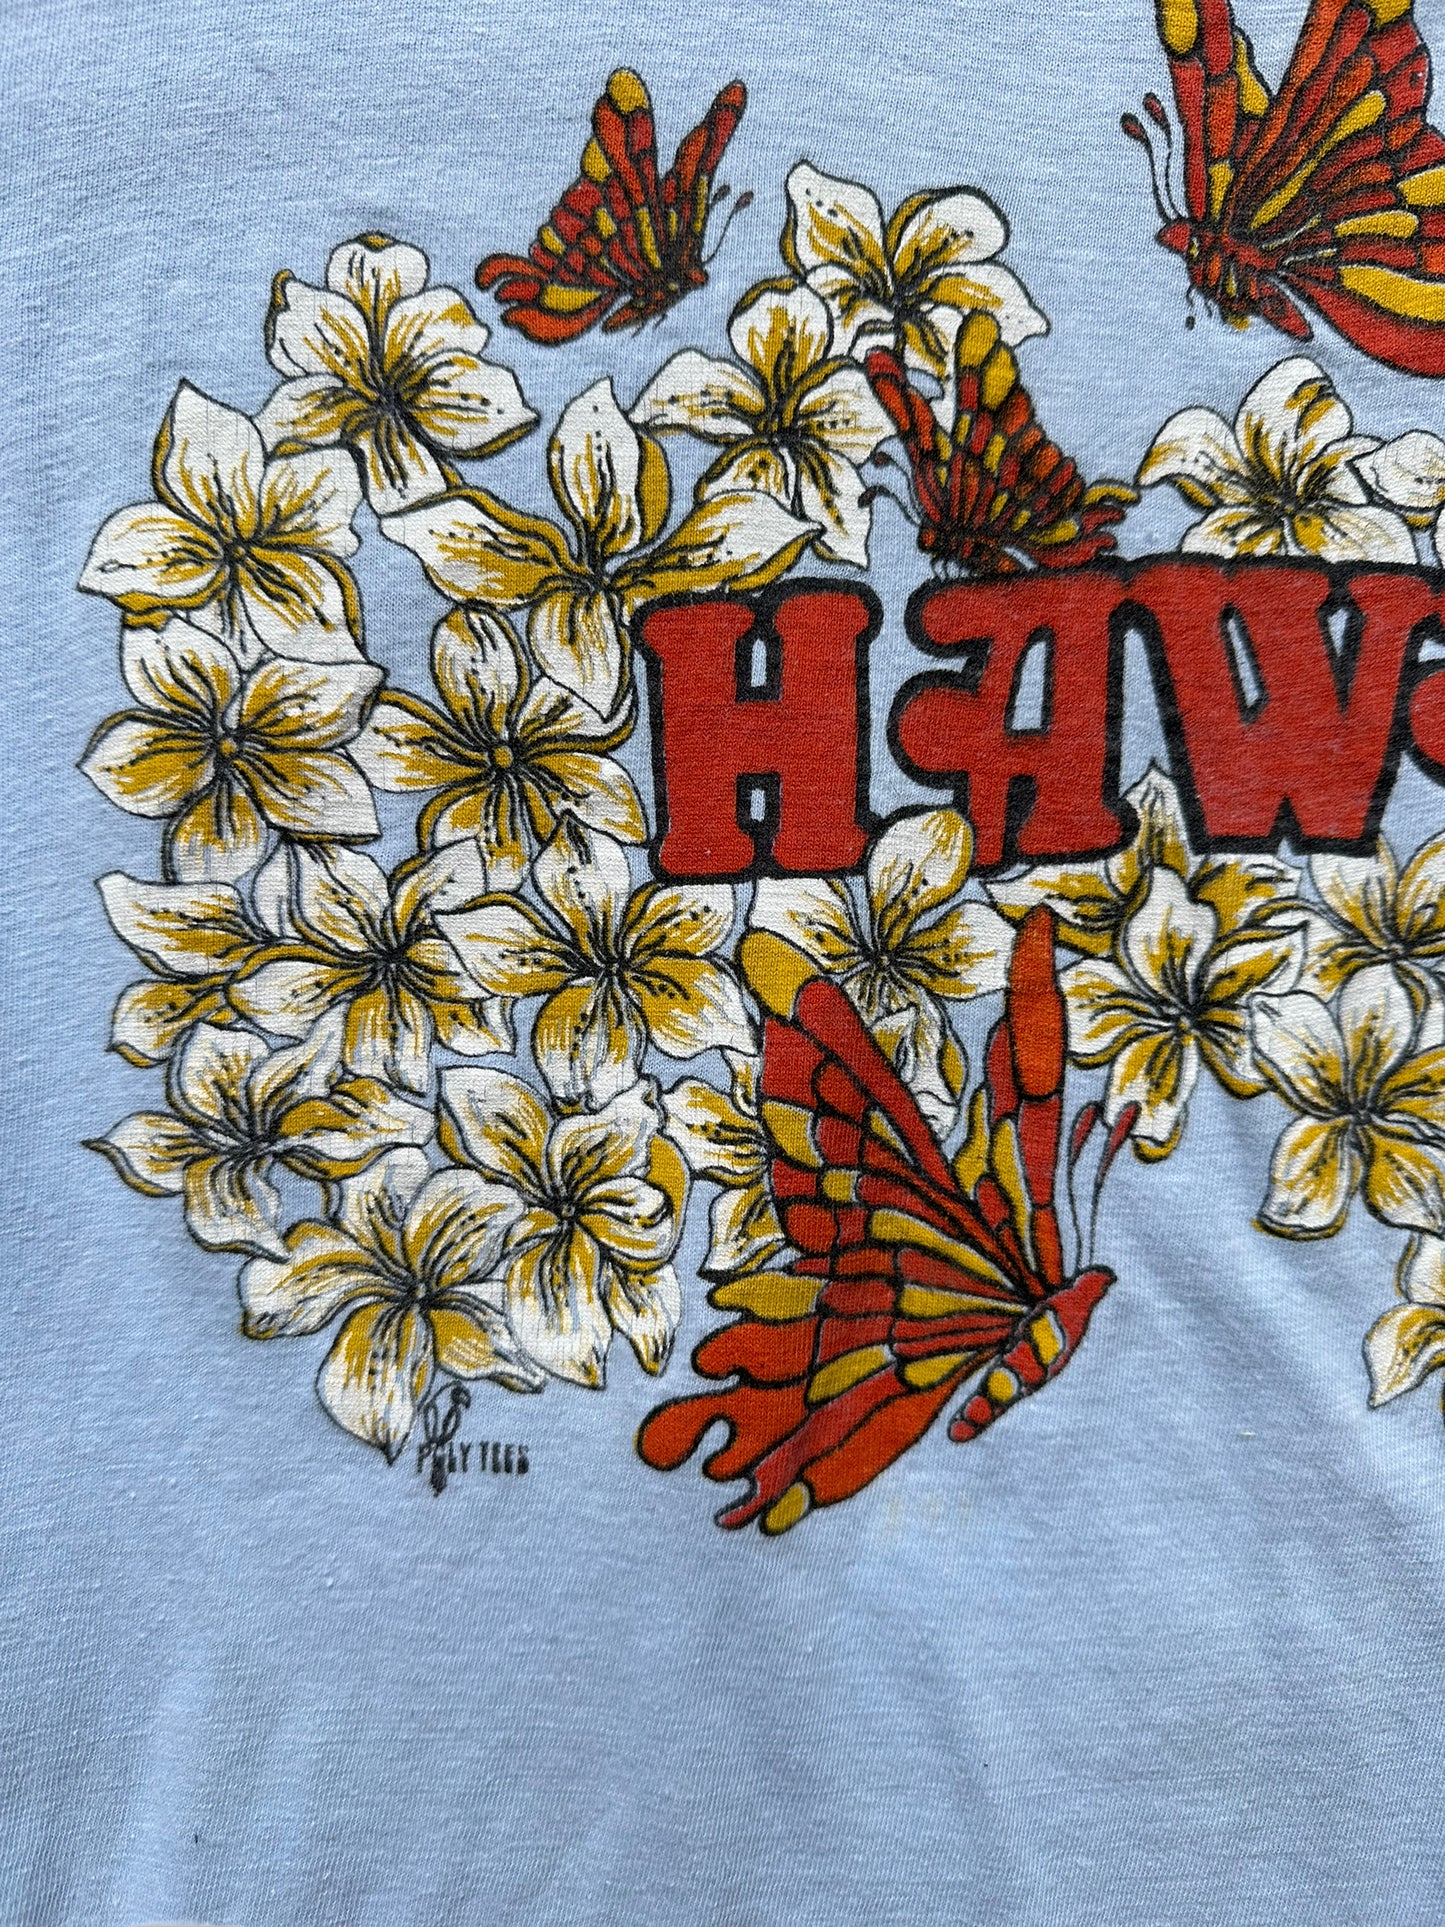 Detail on Graphic of Vintage Hawaii Graphic Tee SZ XL | Vintage T-Shirts Seattle | Barn Owl Vintage Tees Seattle